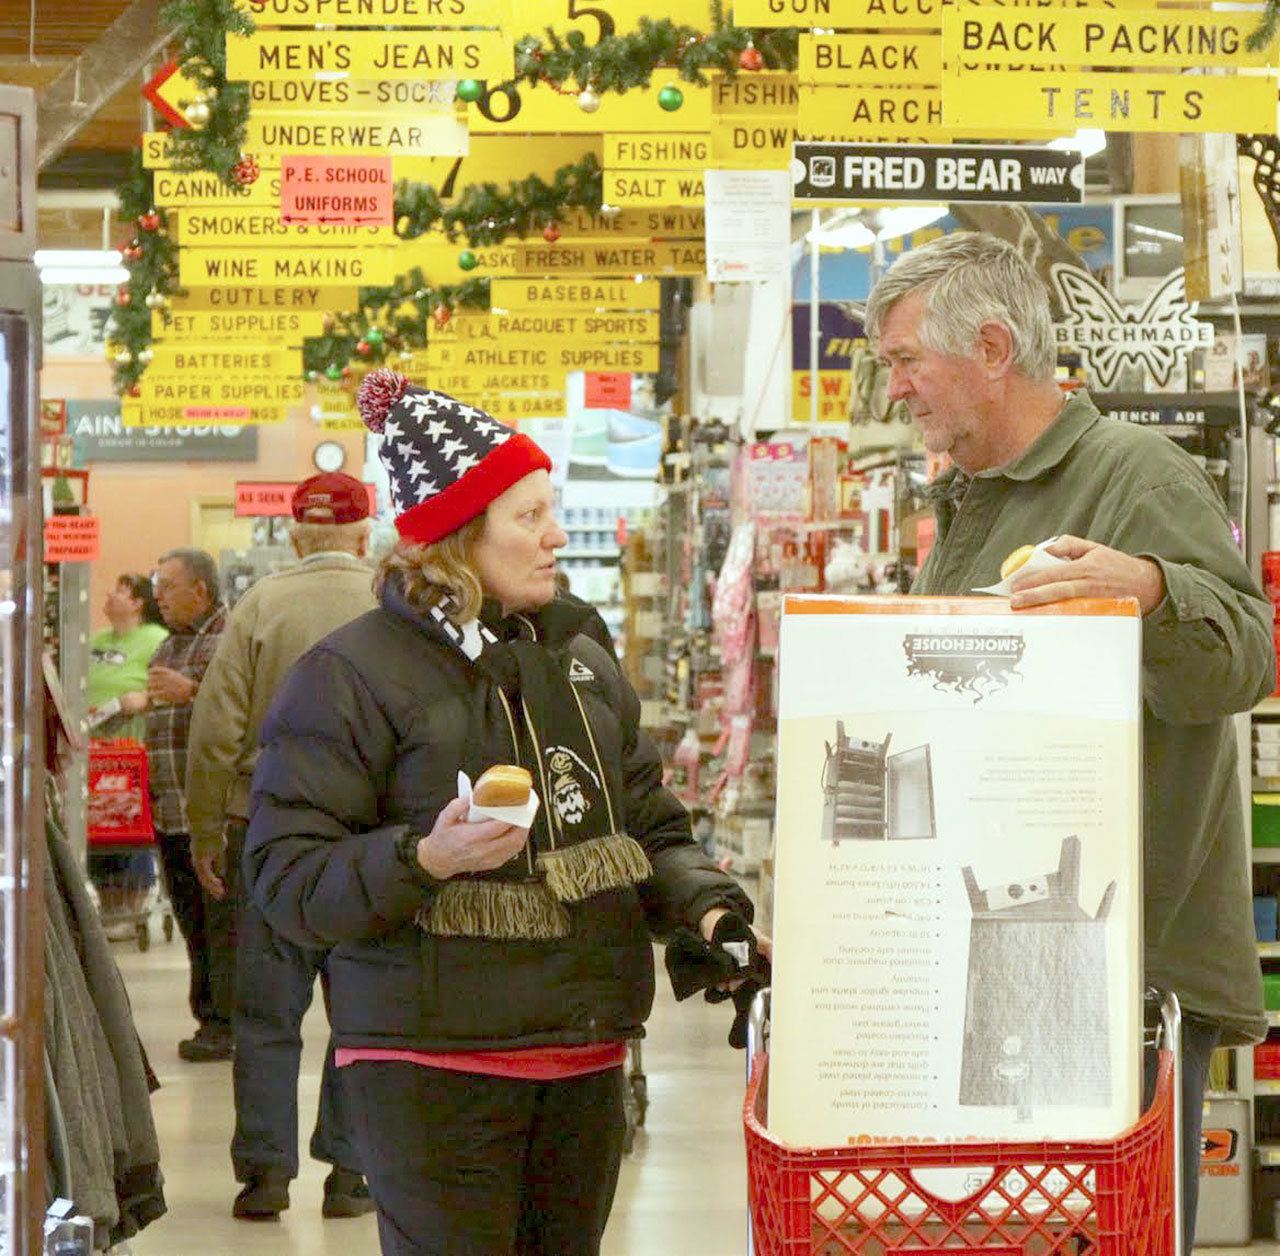 Mike and Ginny Sturgeon of Port Angeles are in the midst of shopping at 6 a.m. at Swain’s General Store early Black Friday. They came to catch a big deal on smokers (in their cart) and eat a free doughnut provided by the store for hardy early morning shoppers. (Dave Logan/for Peninsula Daily News)